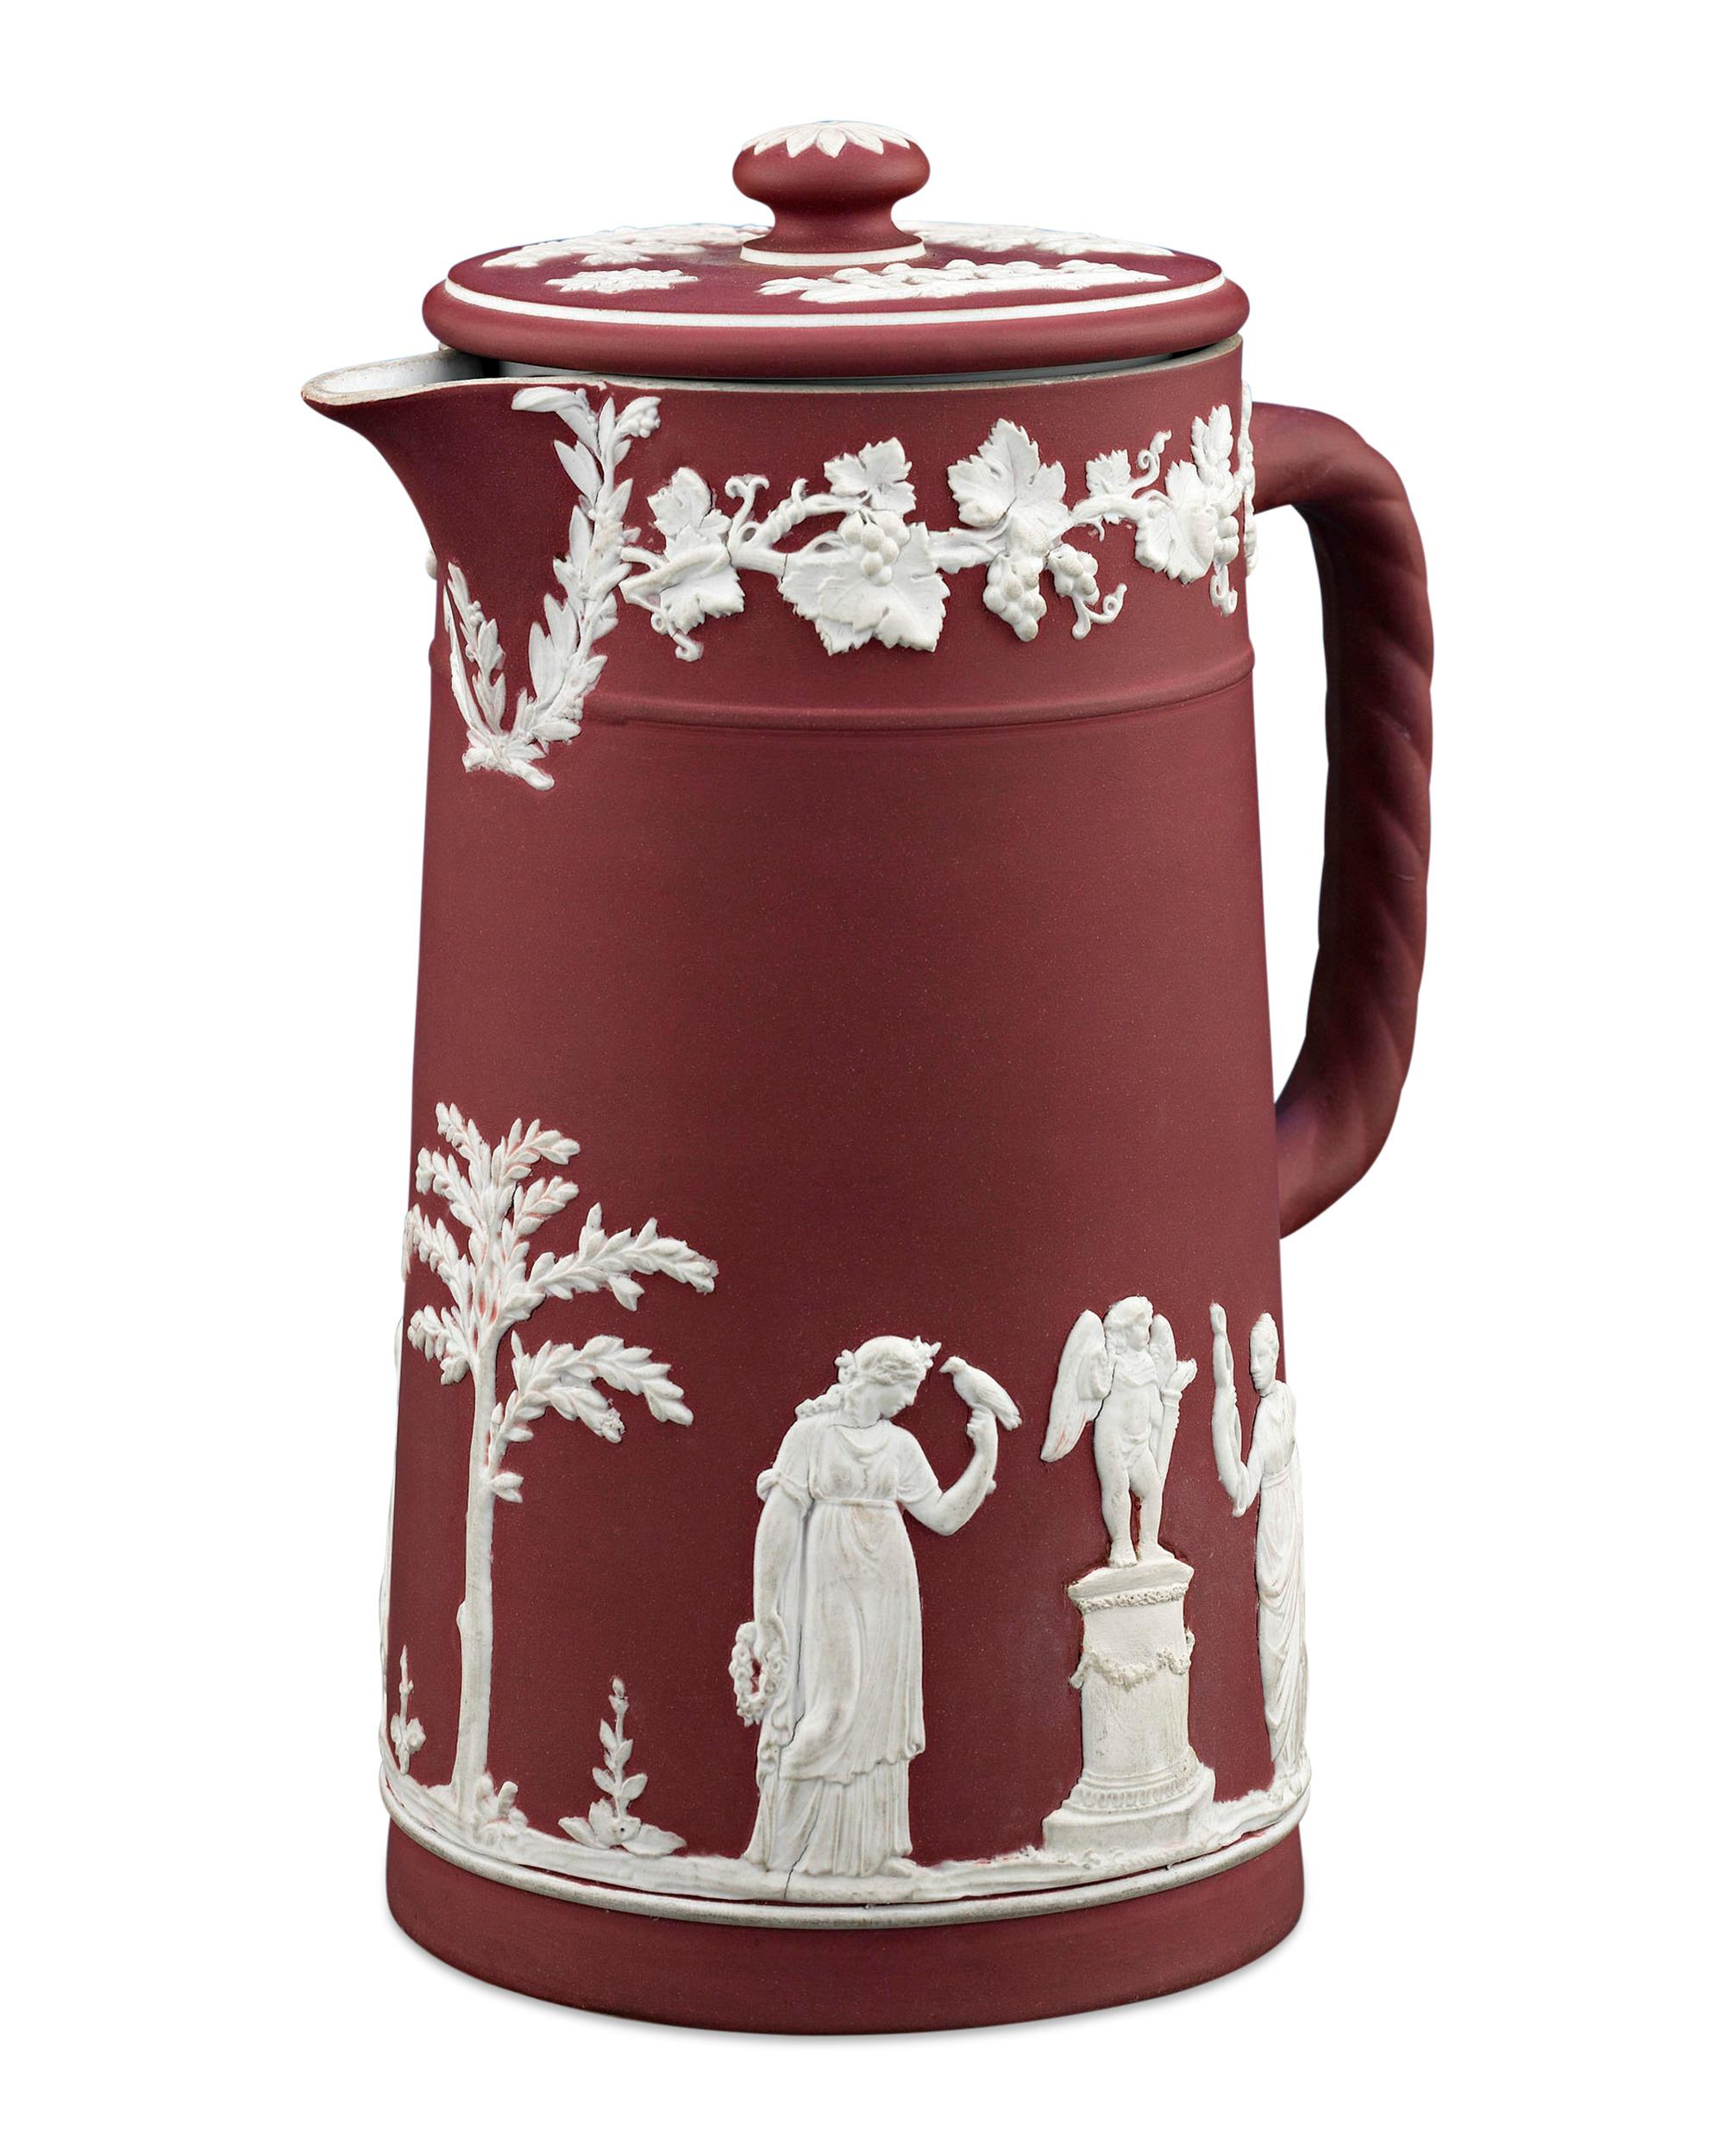 A lovely crimson jasperware jug by Wedgwood, featuring an applied white jasper neoclassical decoration of acanthus leaves and grapes bordering the rim. Maidens, children, and foliage provide the main focal point on the body. A twisted jasper handle